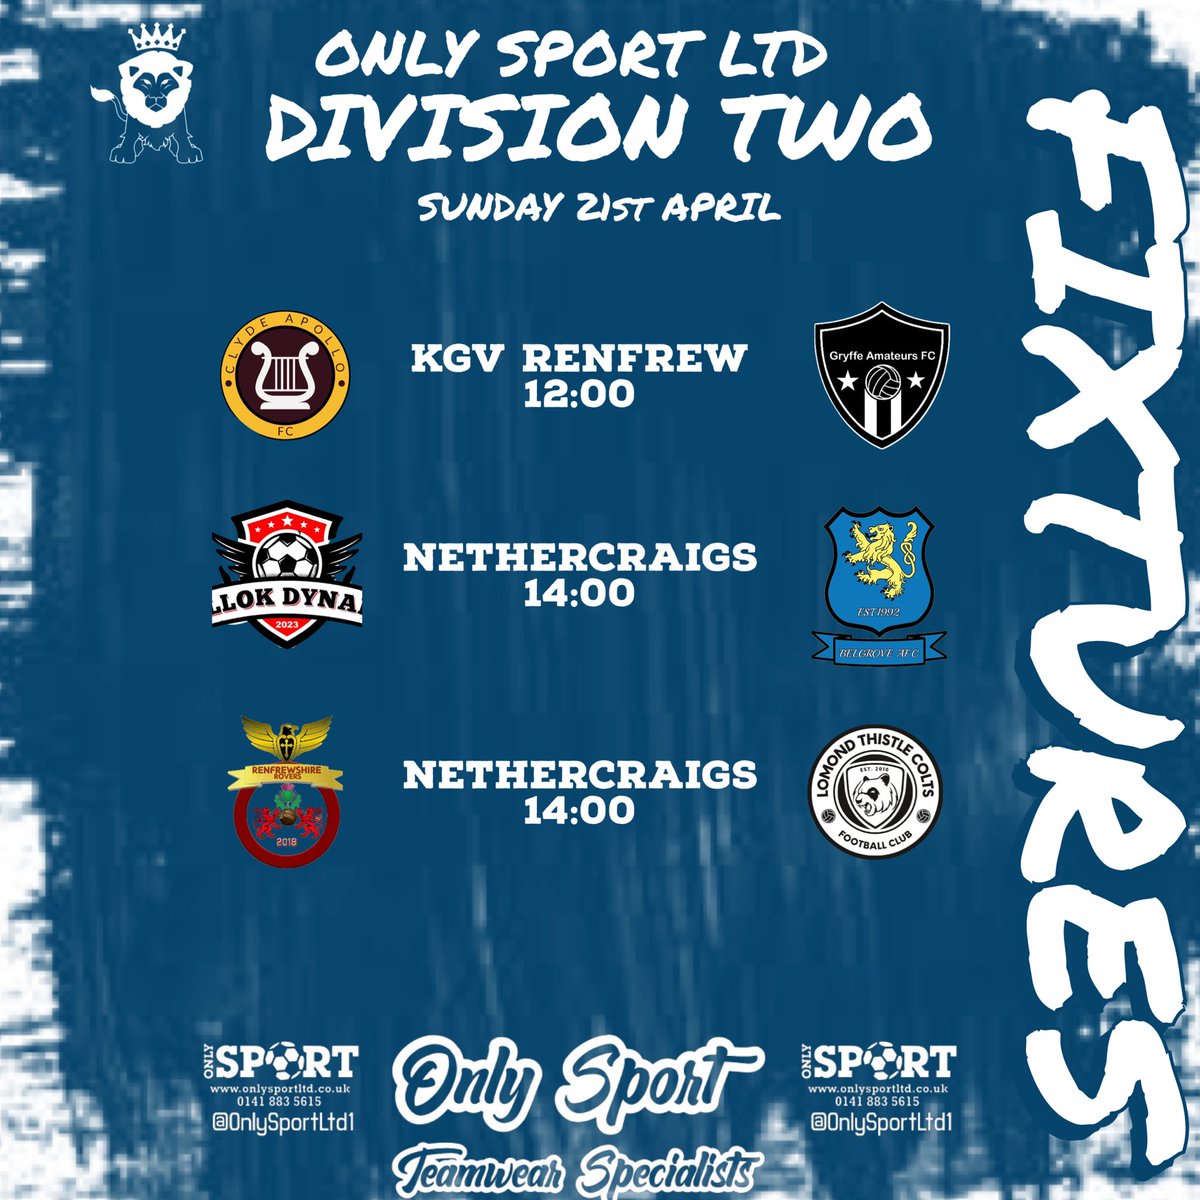 This Sunday we have five league game across the @OnlySportLTD1 Championship & Division Two…. @ScotAmFA @scottish_aff @refsix @ftsc0res @SnJsFootyFocus